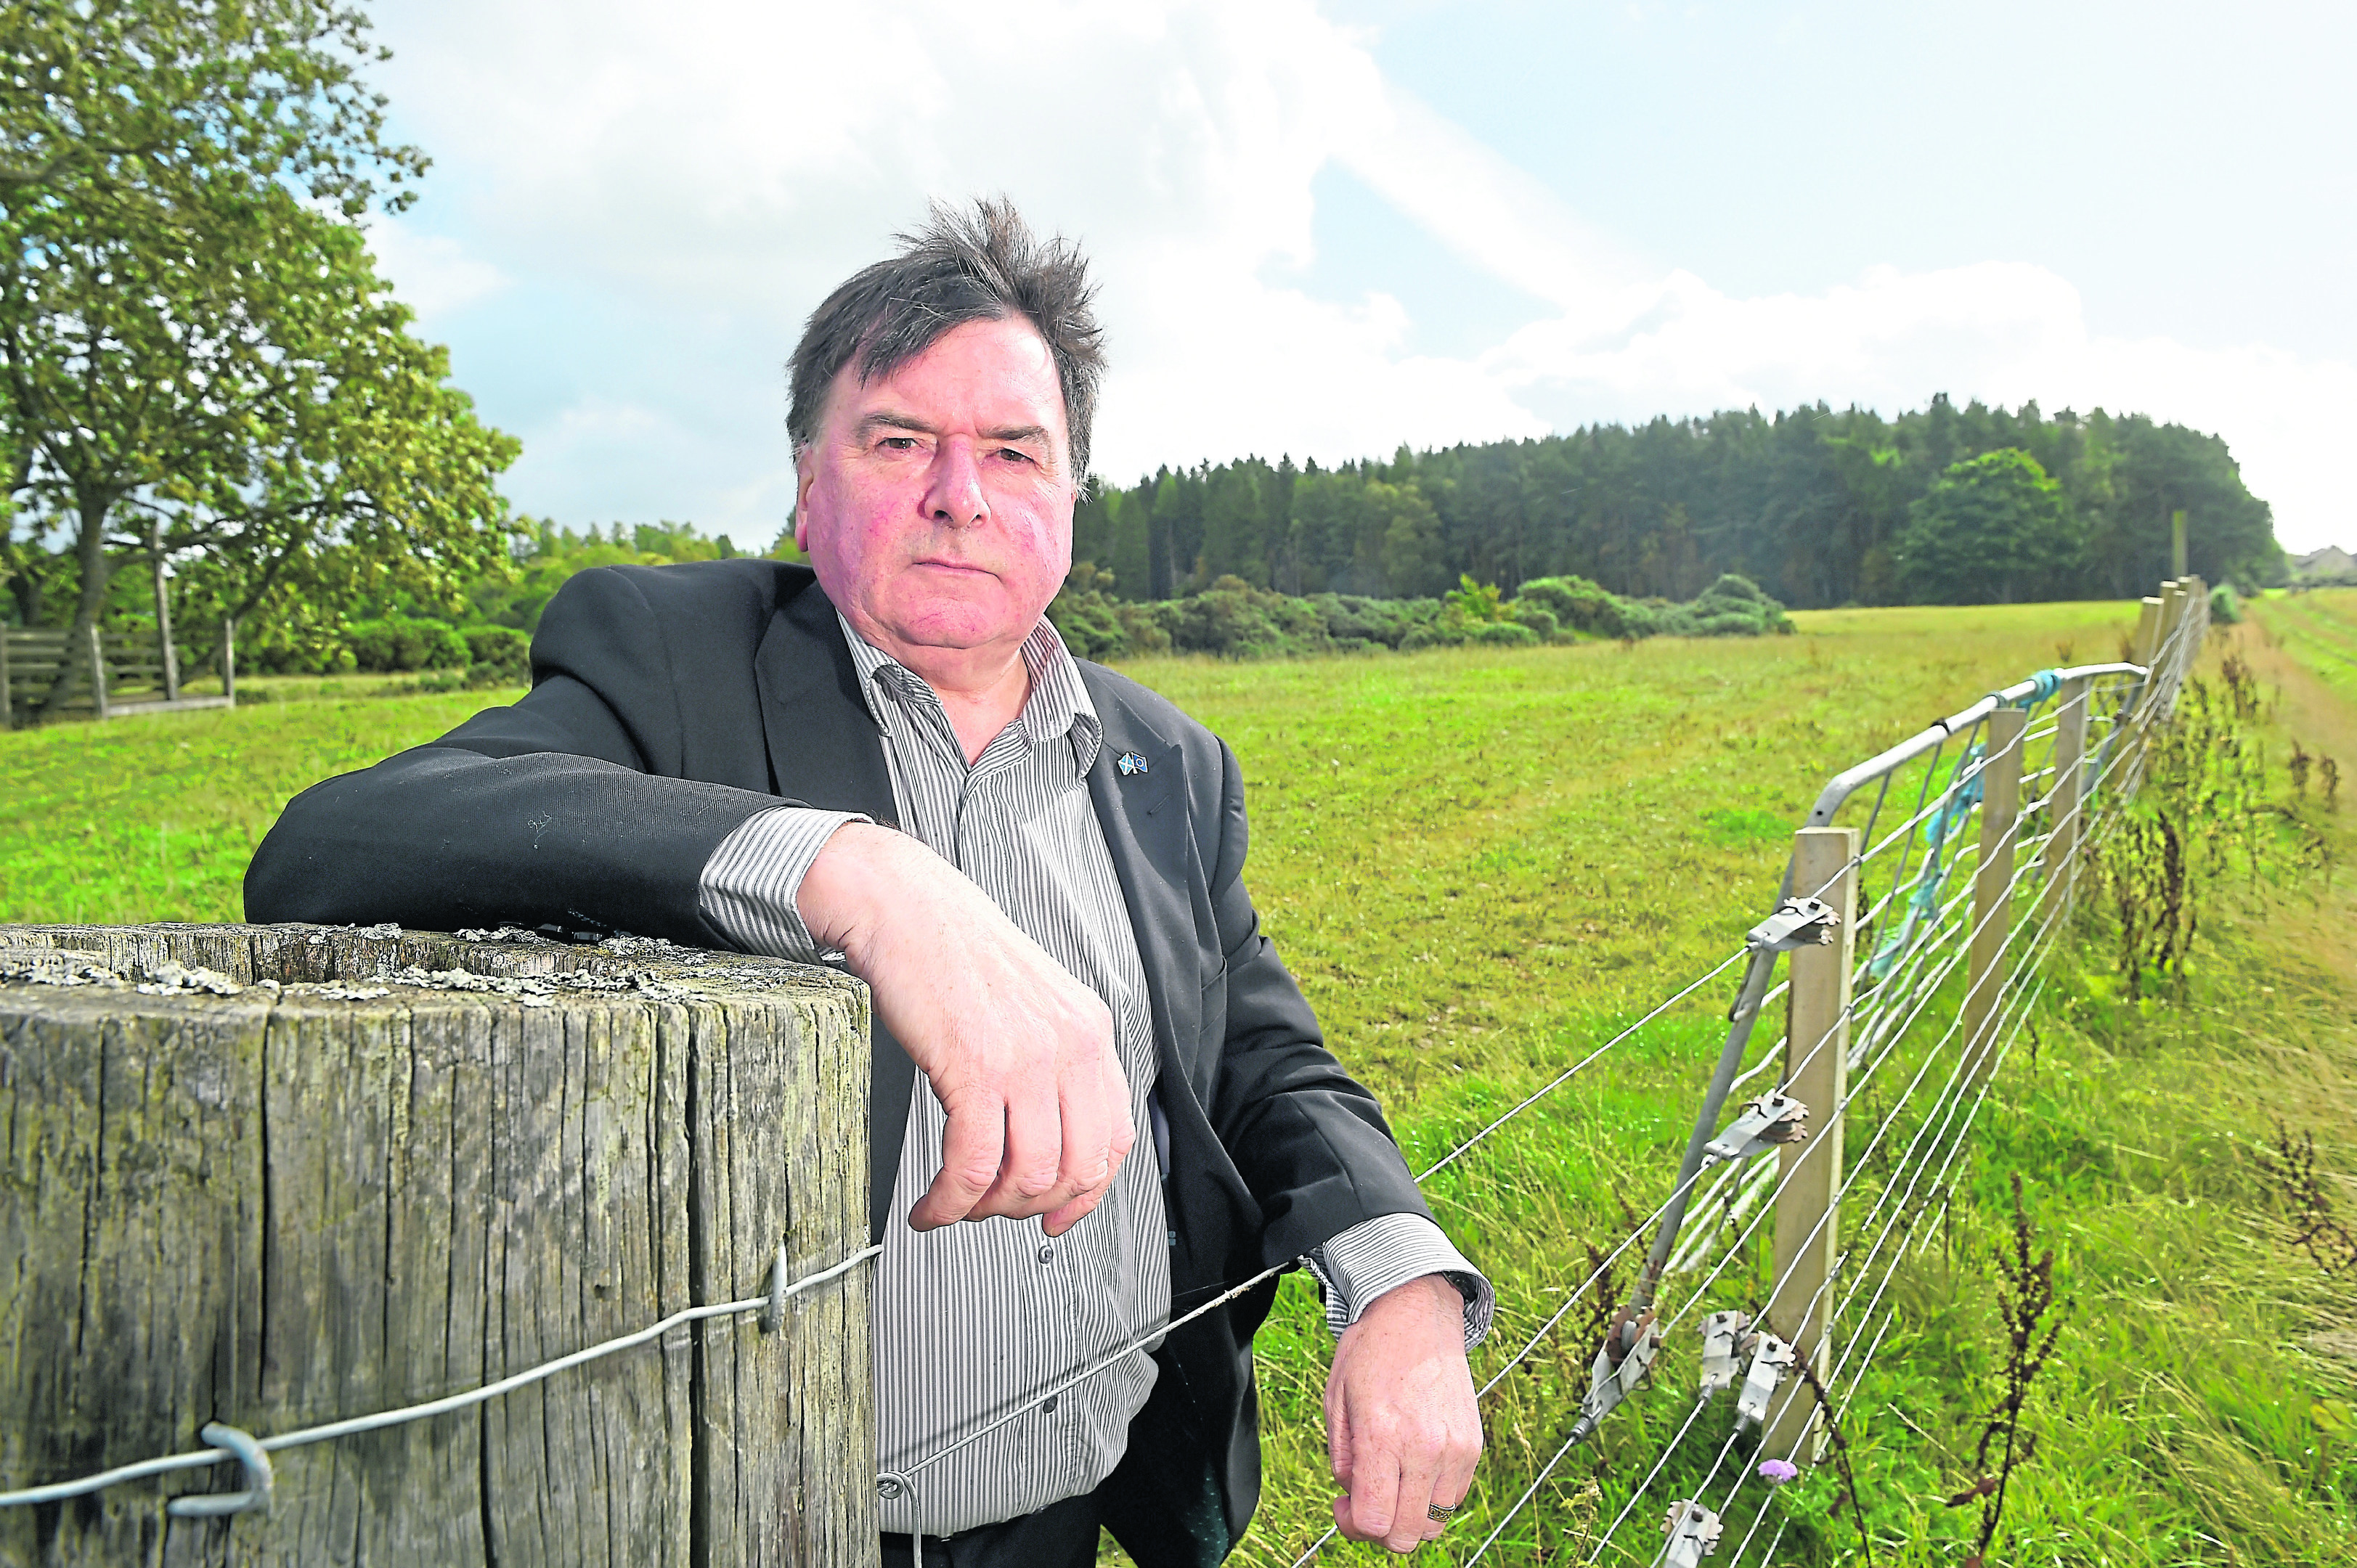 Councillor Ken Gowans in the Inshes area of Inverness where it is proposed to have over 500 timber lorry movements as Balvonie Wood is cut for timber.